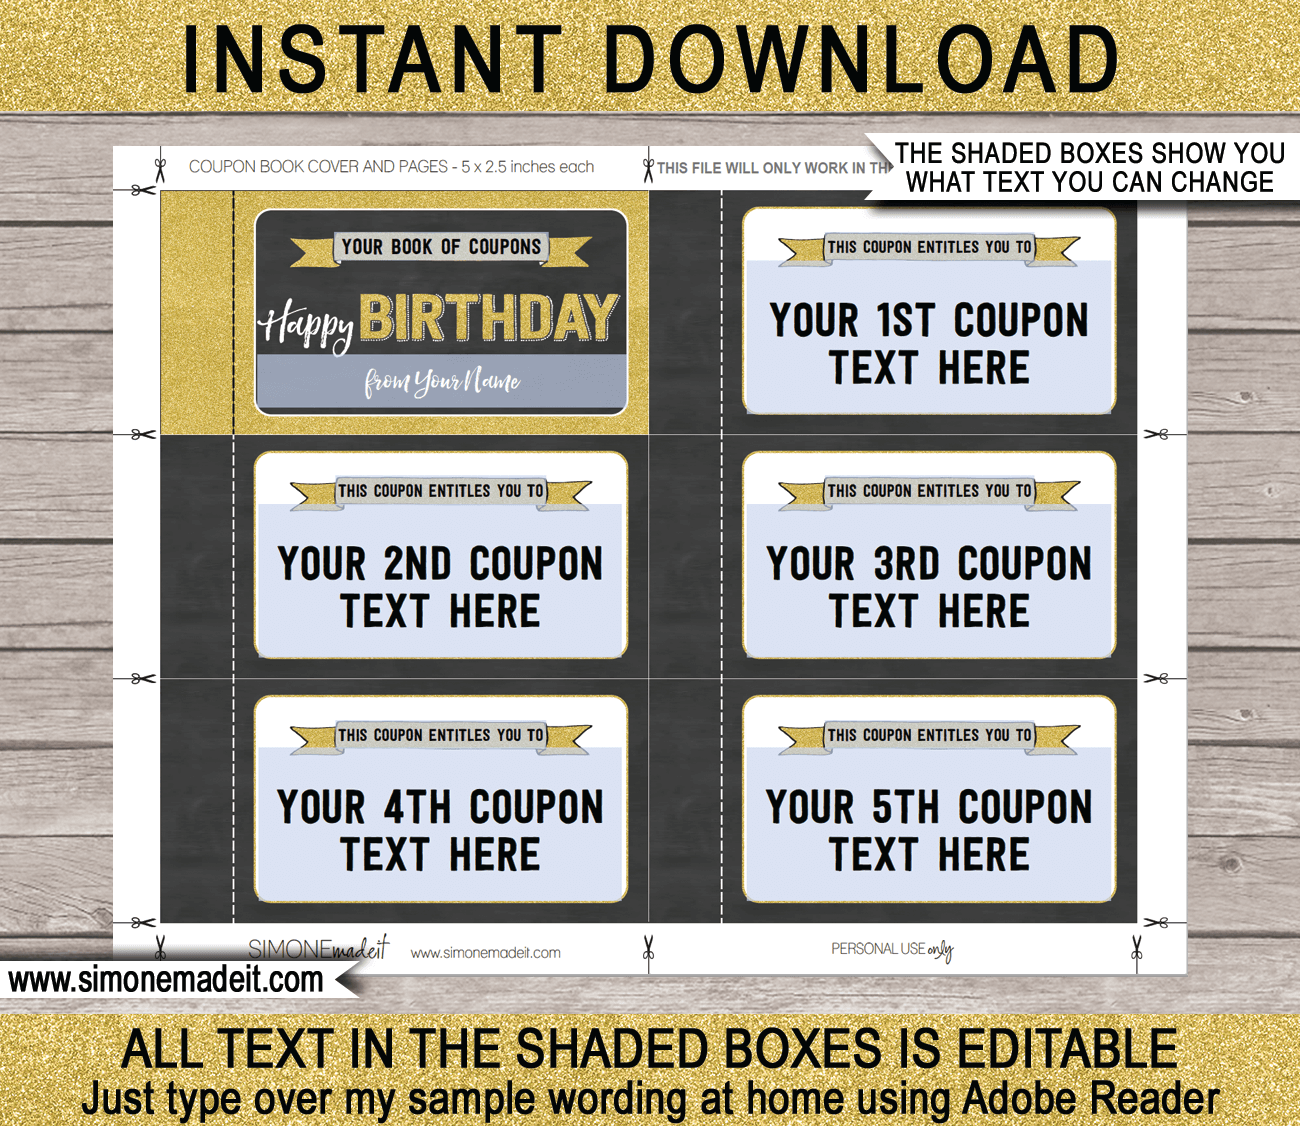 printable-birthday-coupon-book-template-diy-personalized-coupons